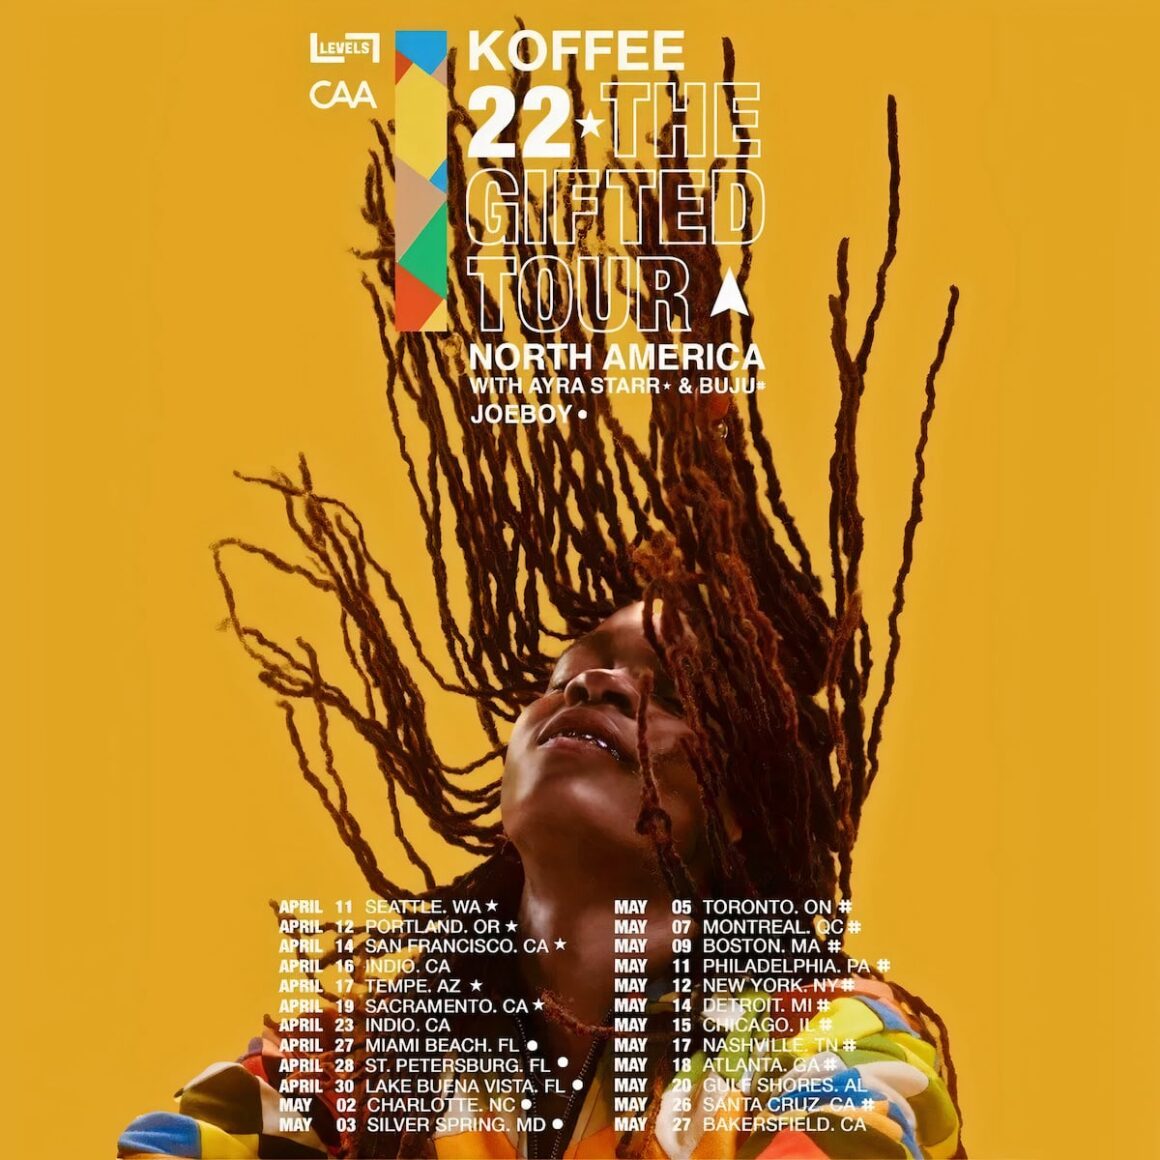 Koffee North American Gifted Tour Dates